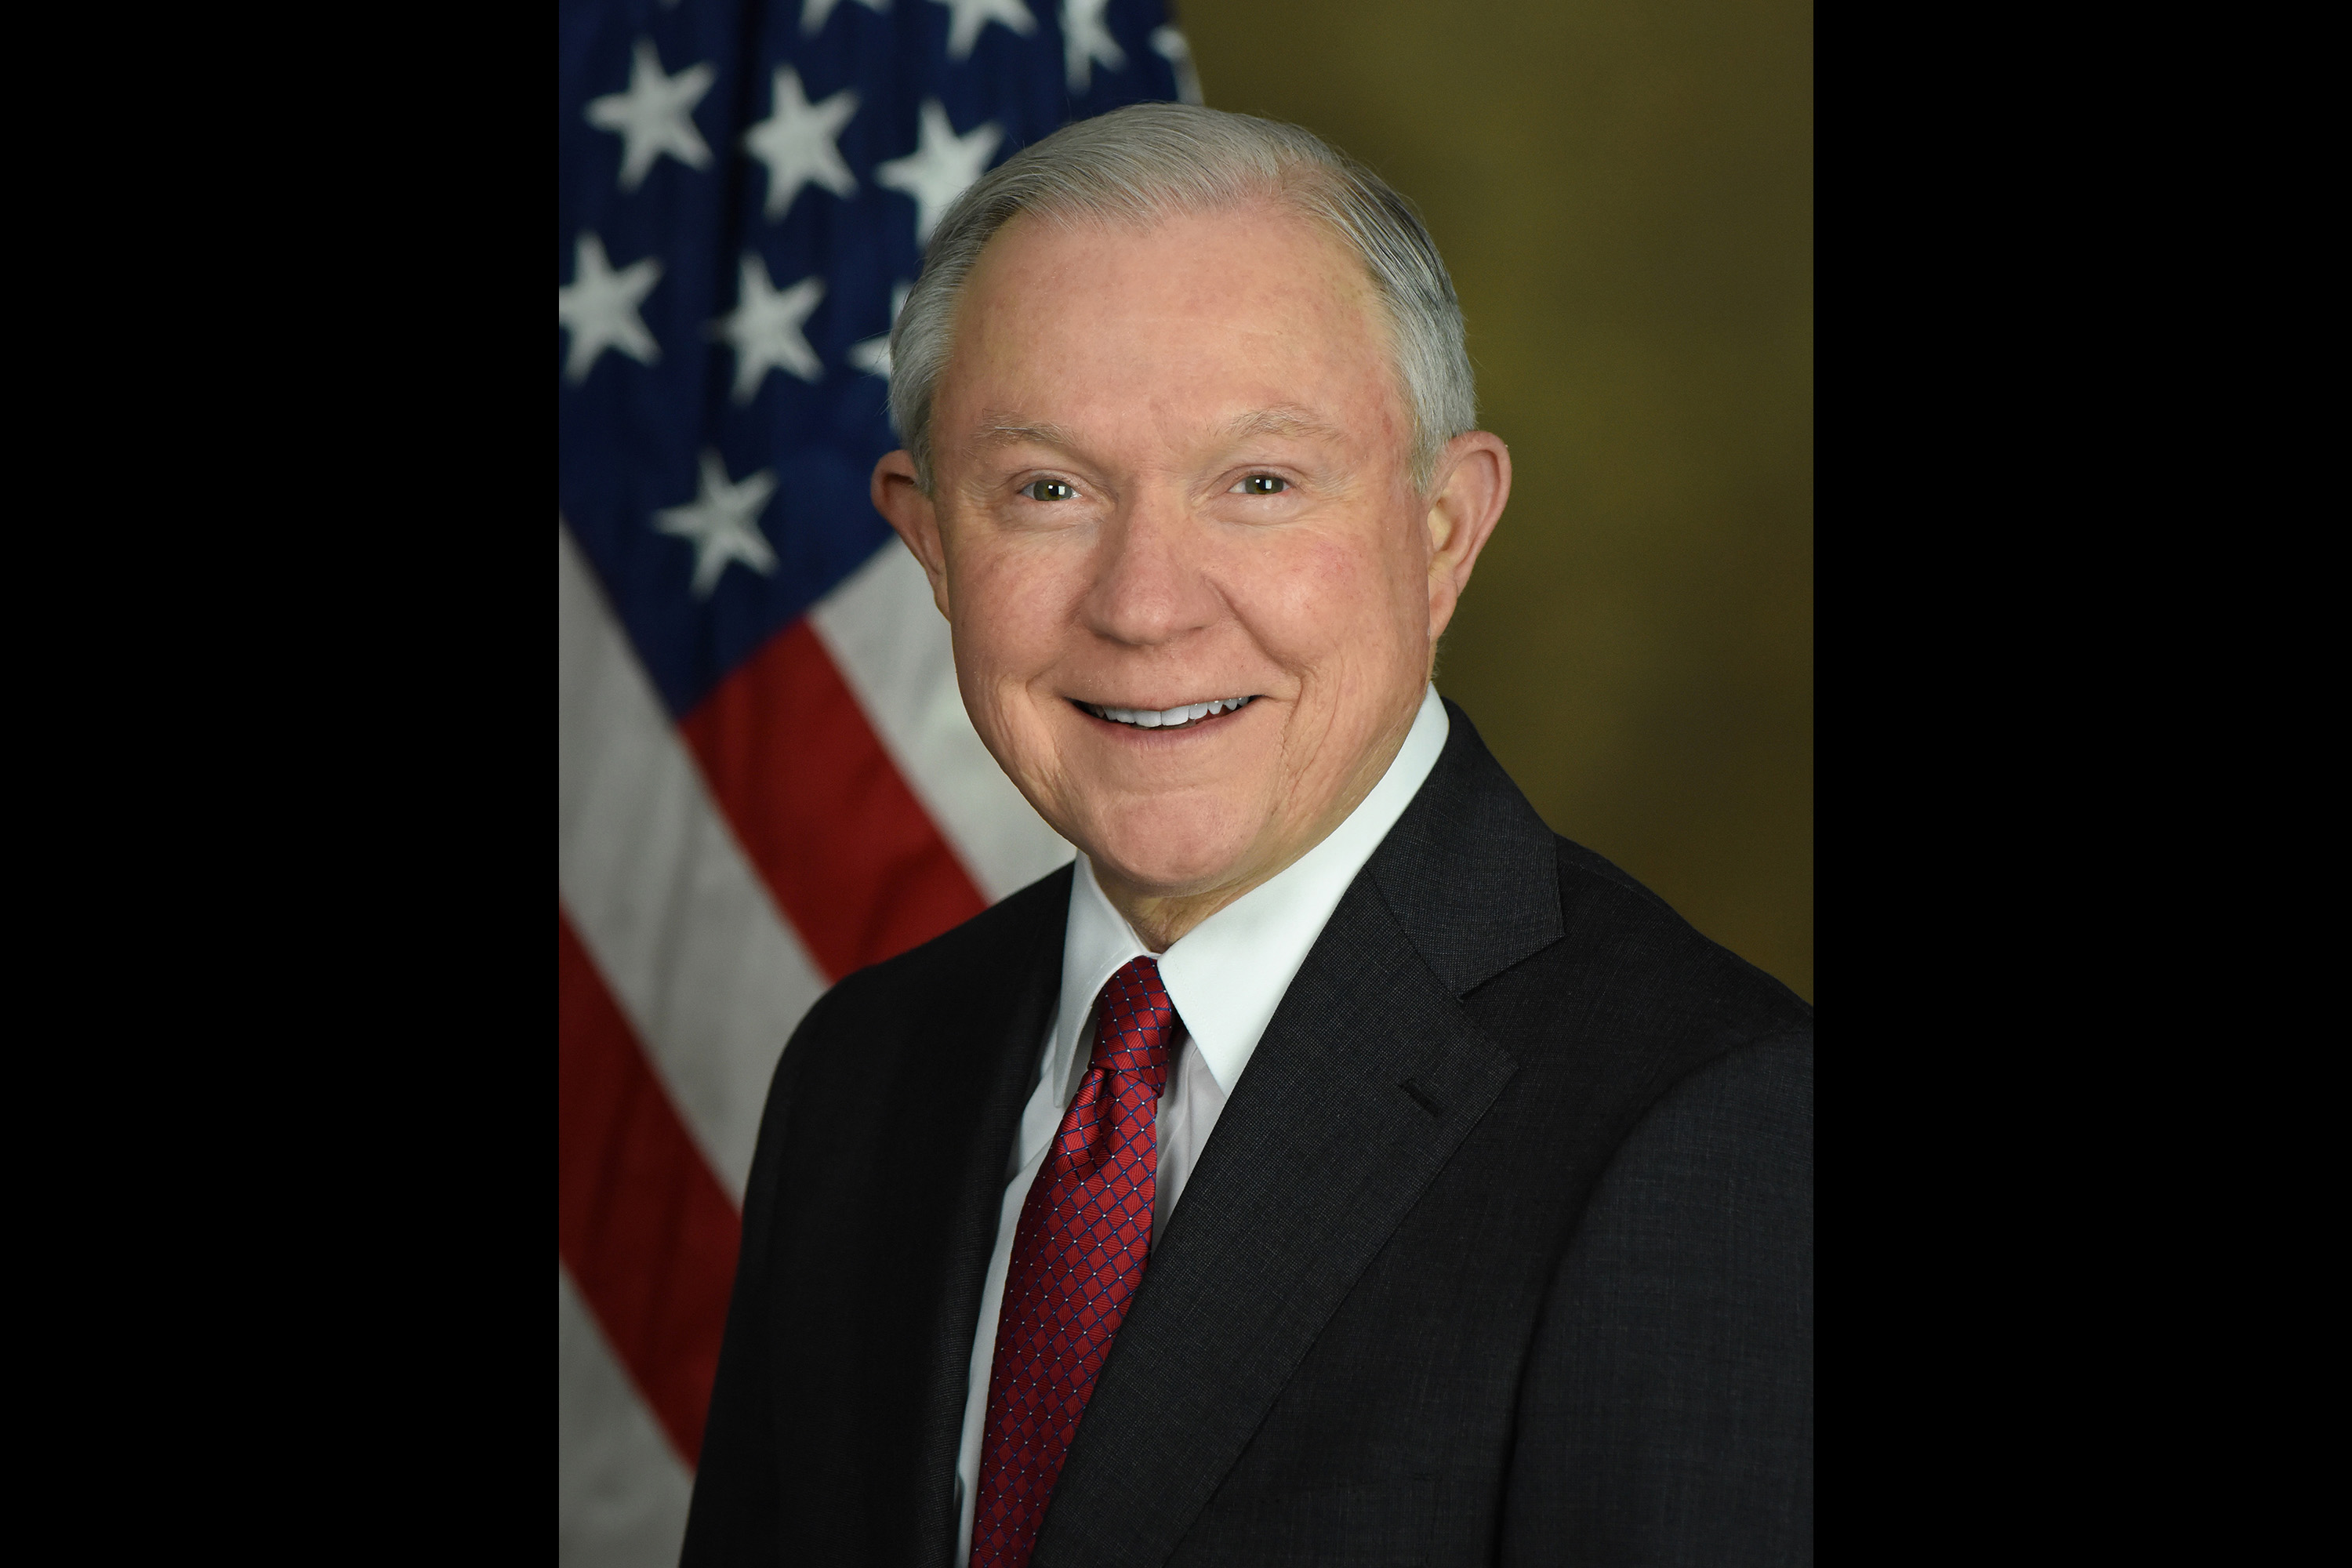 U.S. Attorney General Jeff Sessions faces criticism, even charges under church law, from fellow United Methodists unhappy with his enforcement and justification of the Trump Administration's zero tolerance policy on immigration violations. Official portrait by United States Department of Justice.